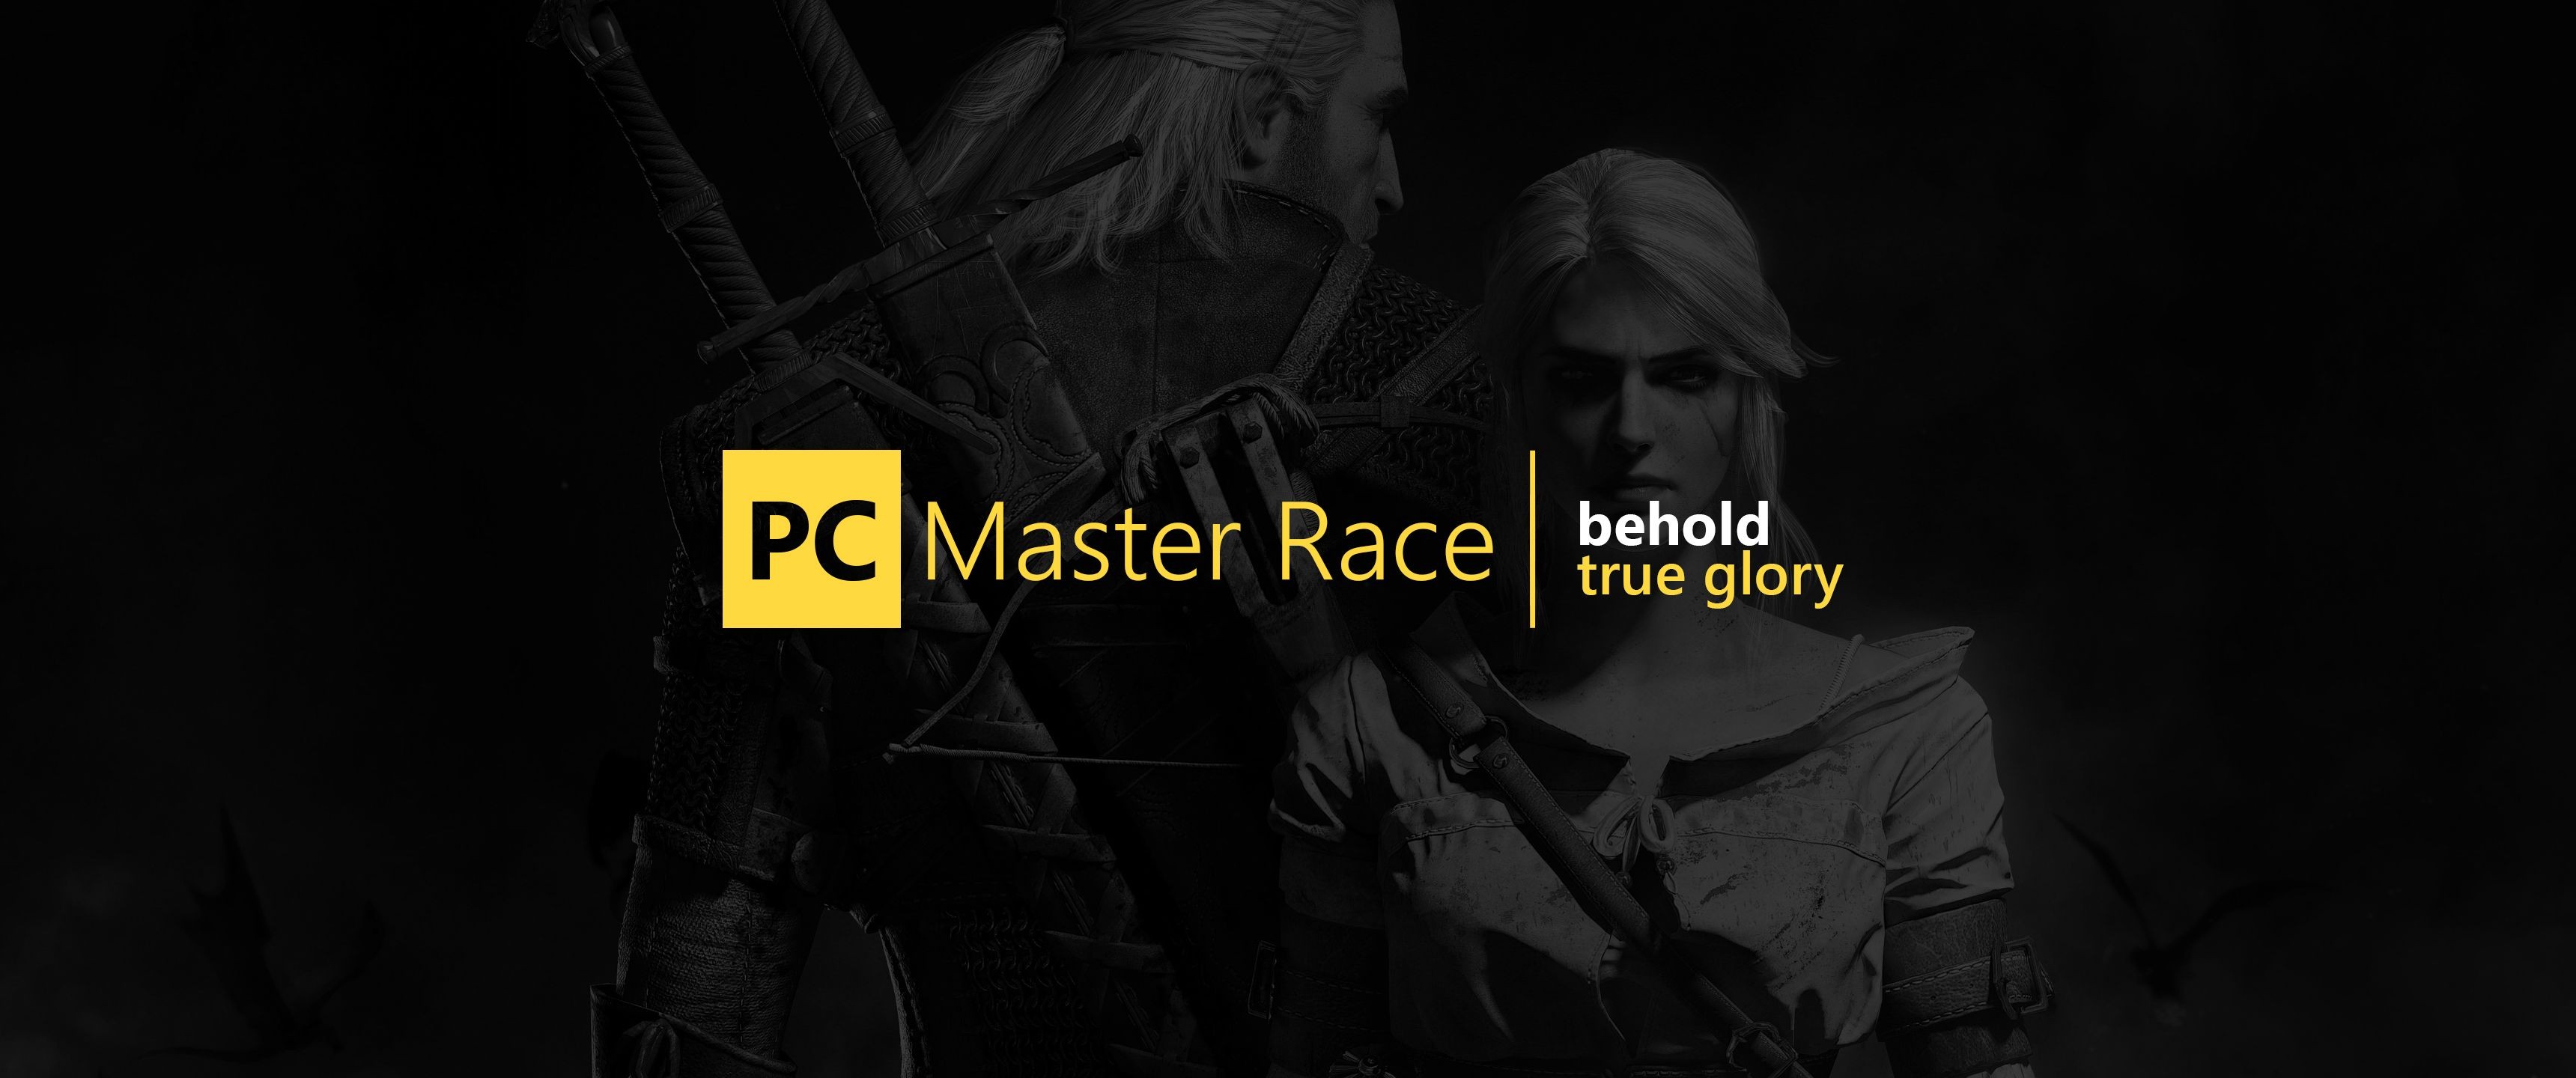 PC Gaming PC Master Race Geralt Of Rivia The Witcher The Witcher 3 Wild Hunt Cirilla Fiona Elen Rian 3440x1440